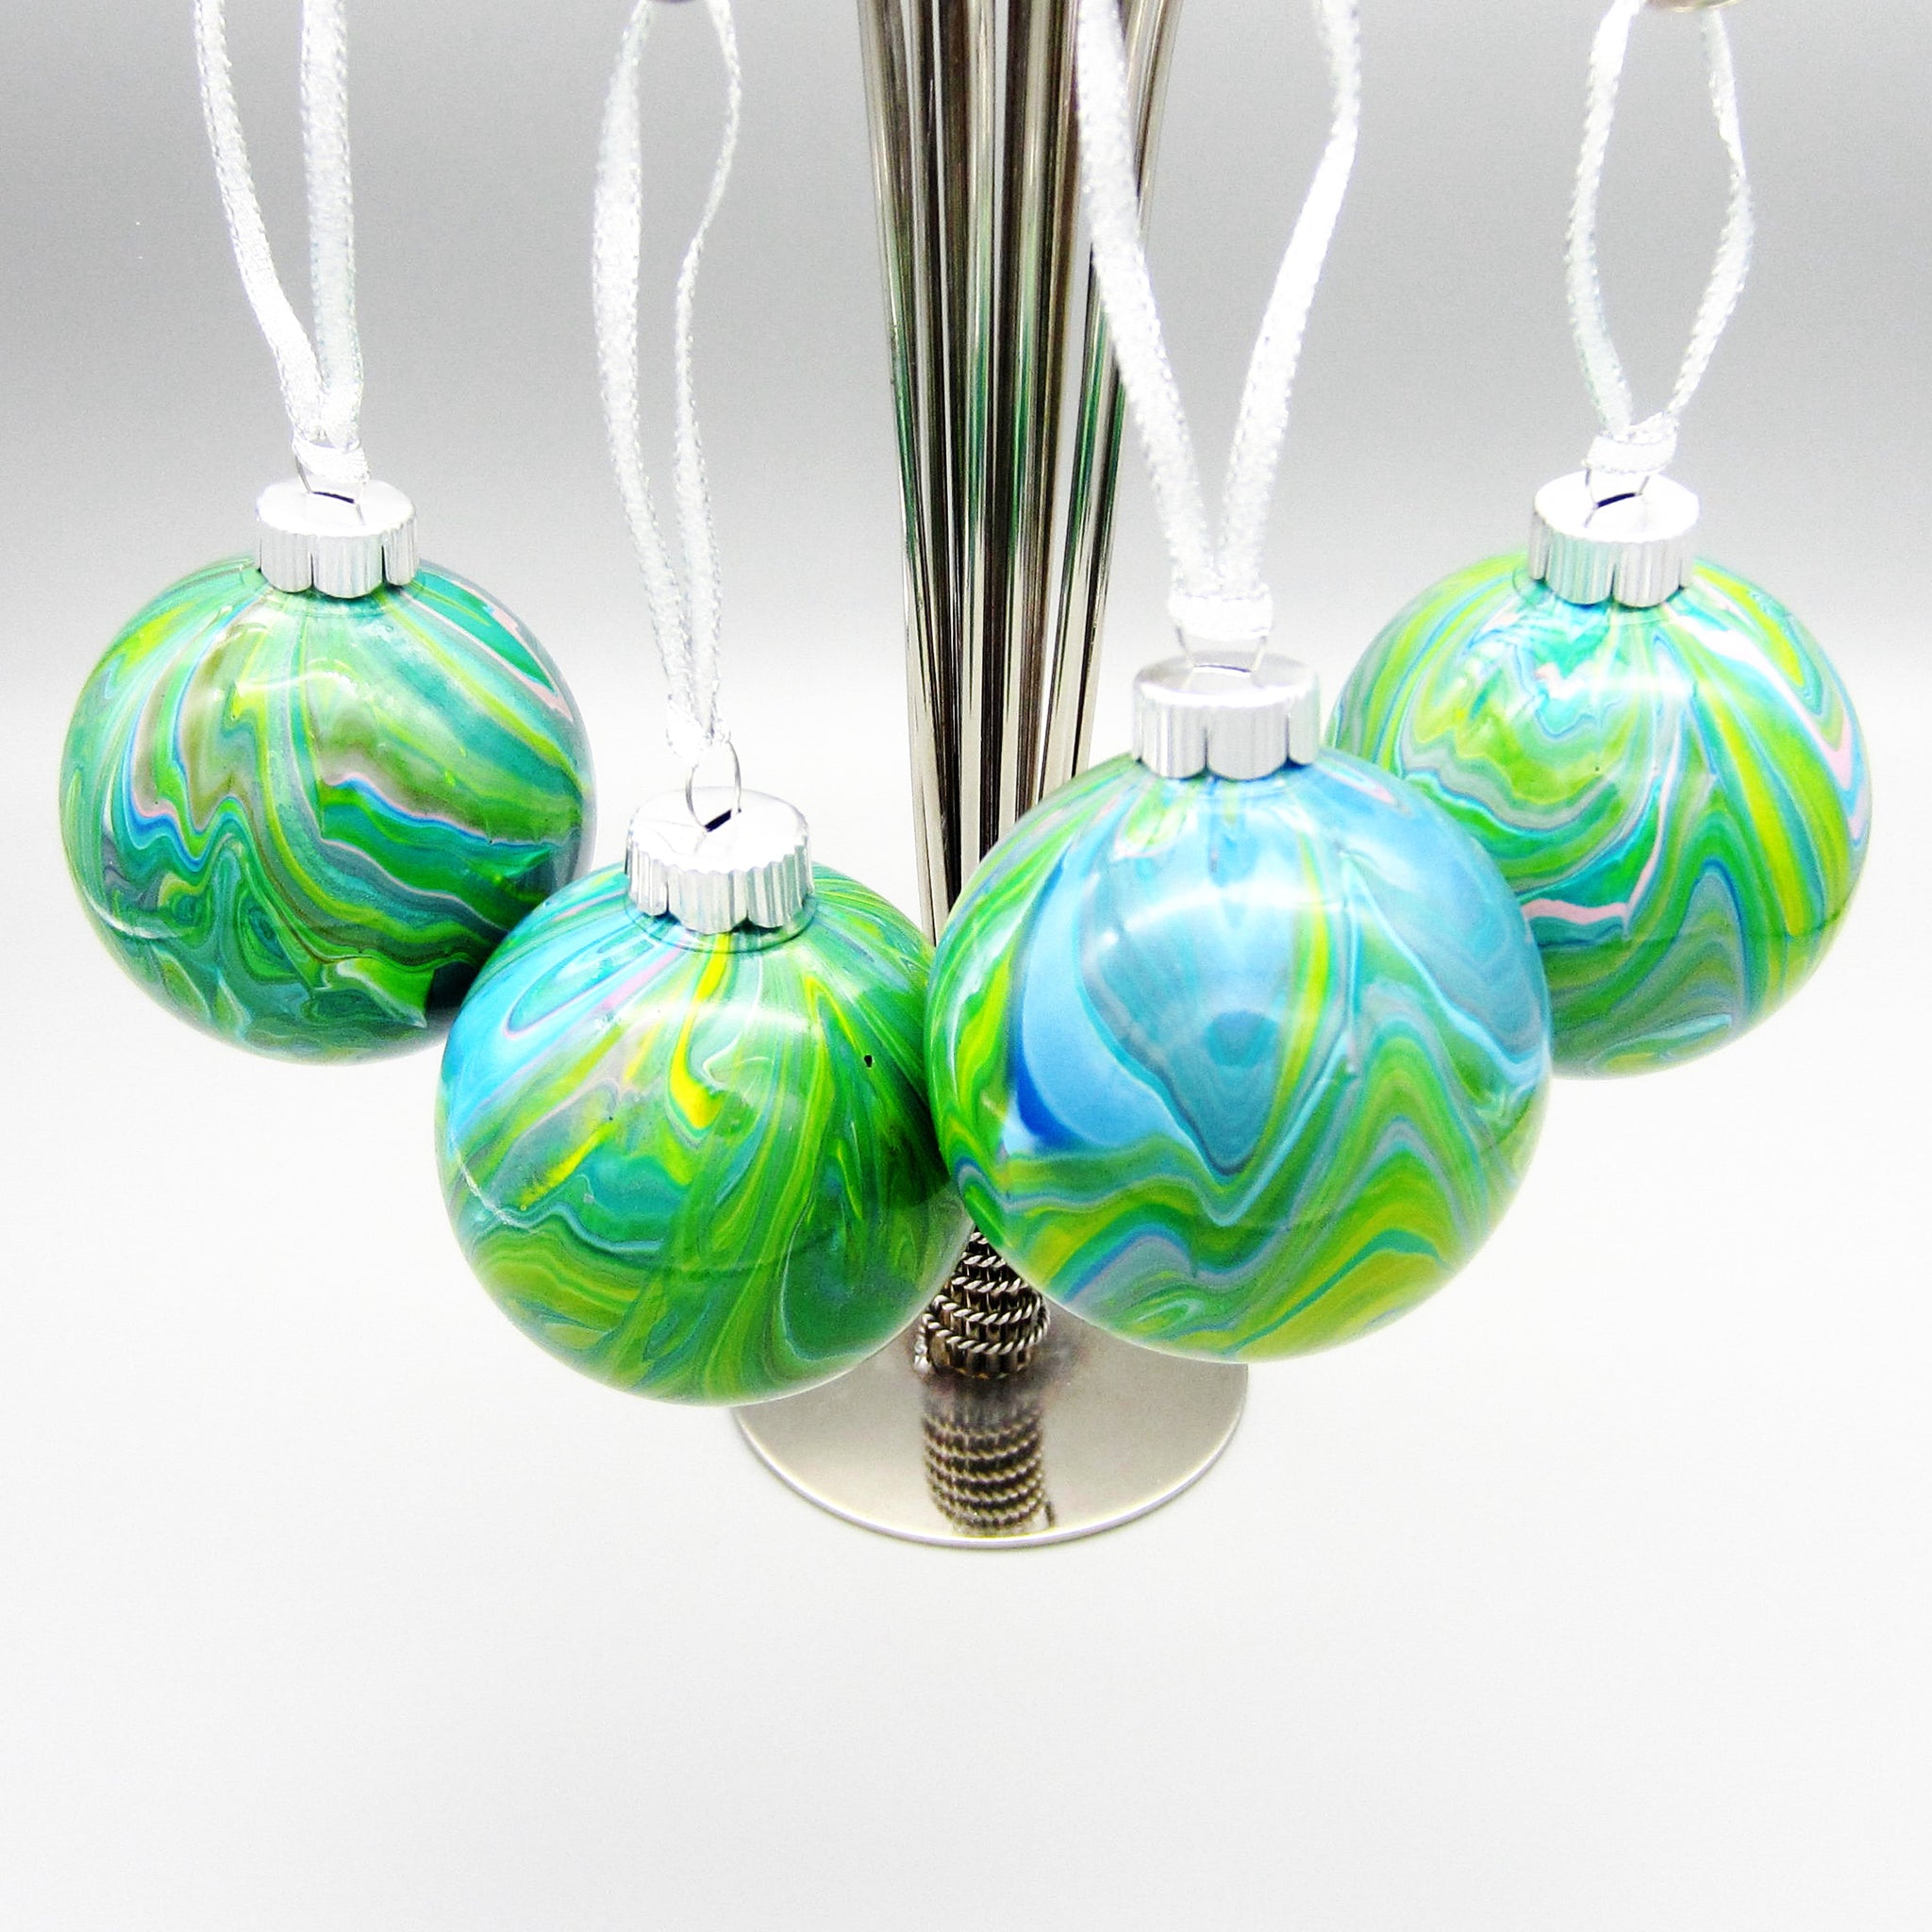 Set of 4 Hand Painted Turquoise Christmas Ornaments